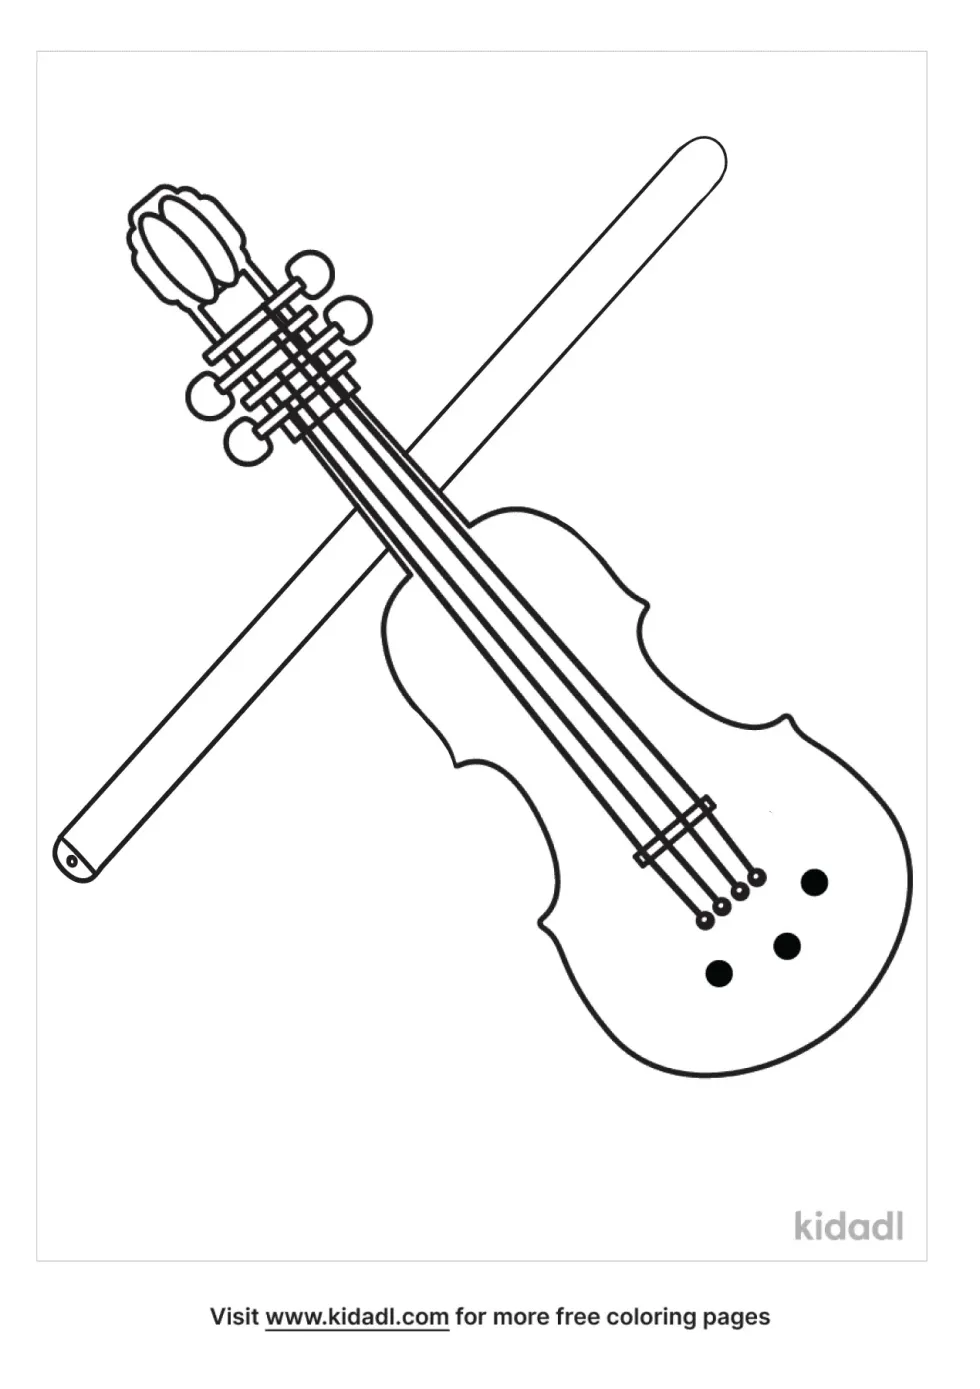 Violin With Its Bow Coloring Page